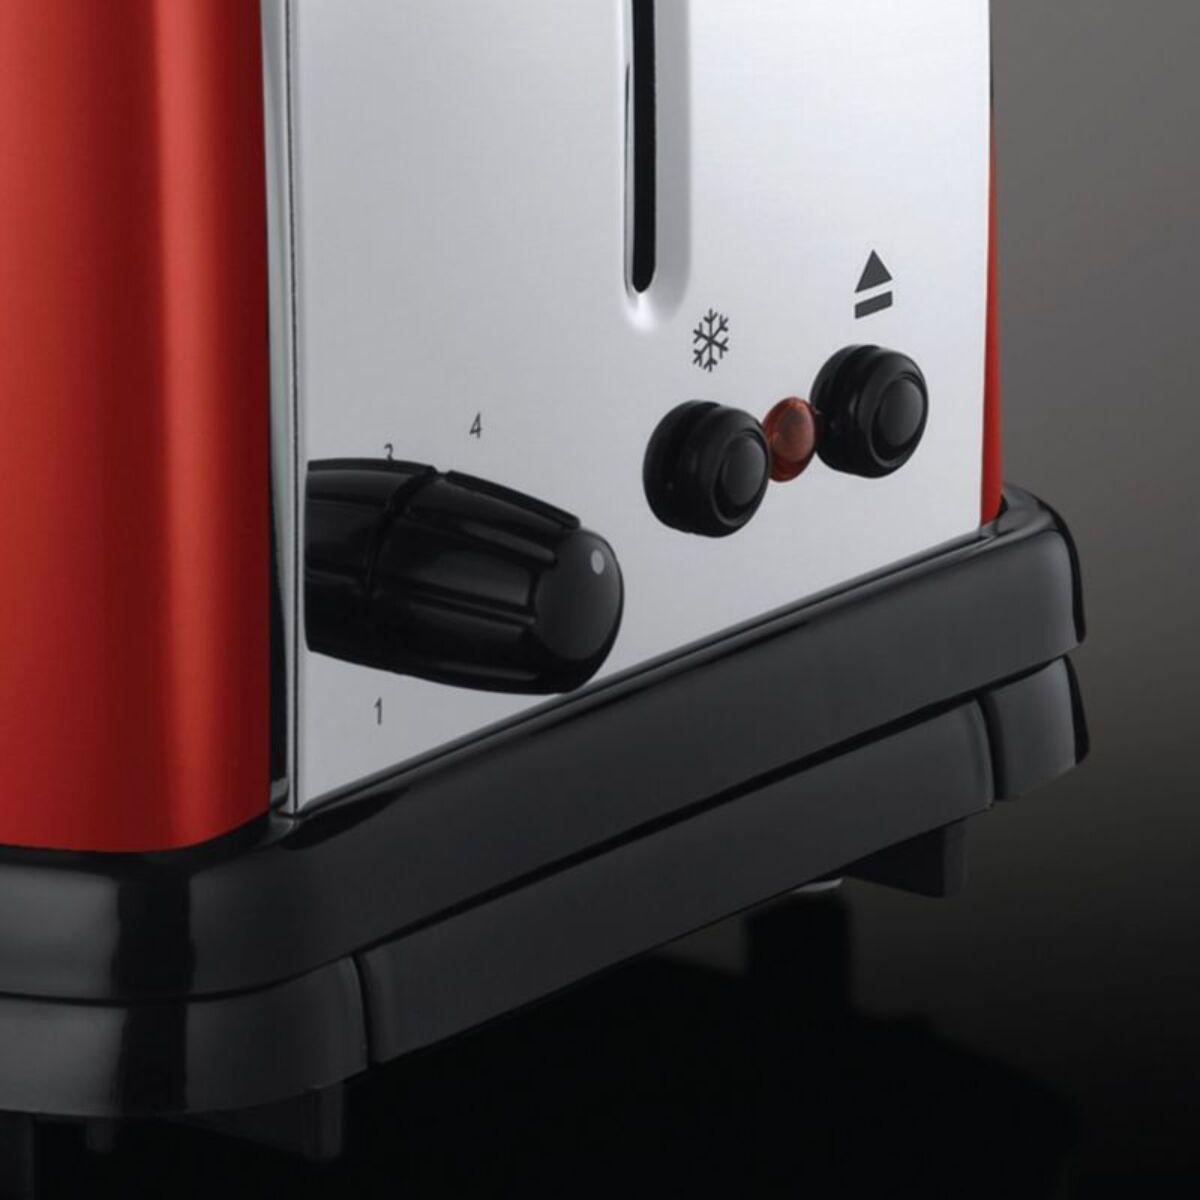 Toaster RUSSELL HOBBS Colours Plus 23330-56 Rouge